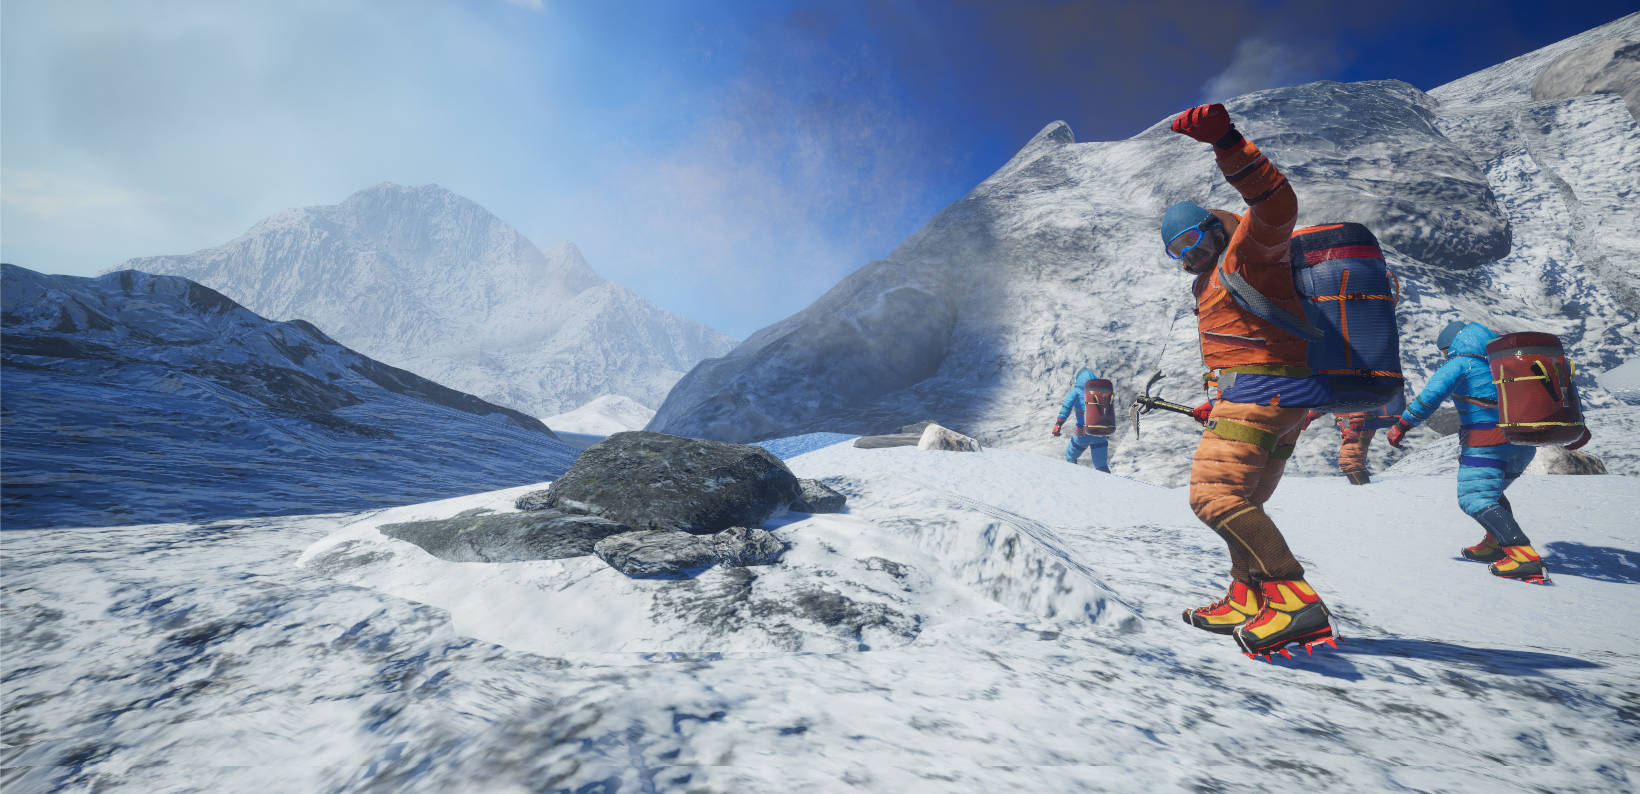 Mountain climbing simulator Climber Sky is the Limit announced for